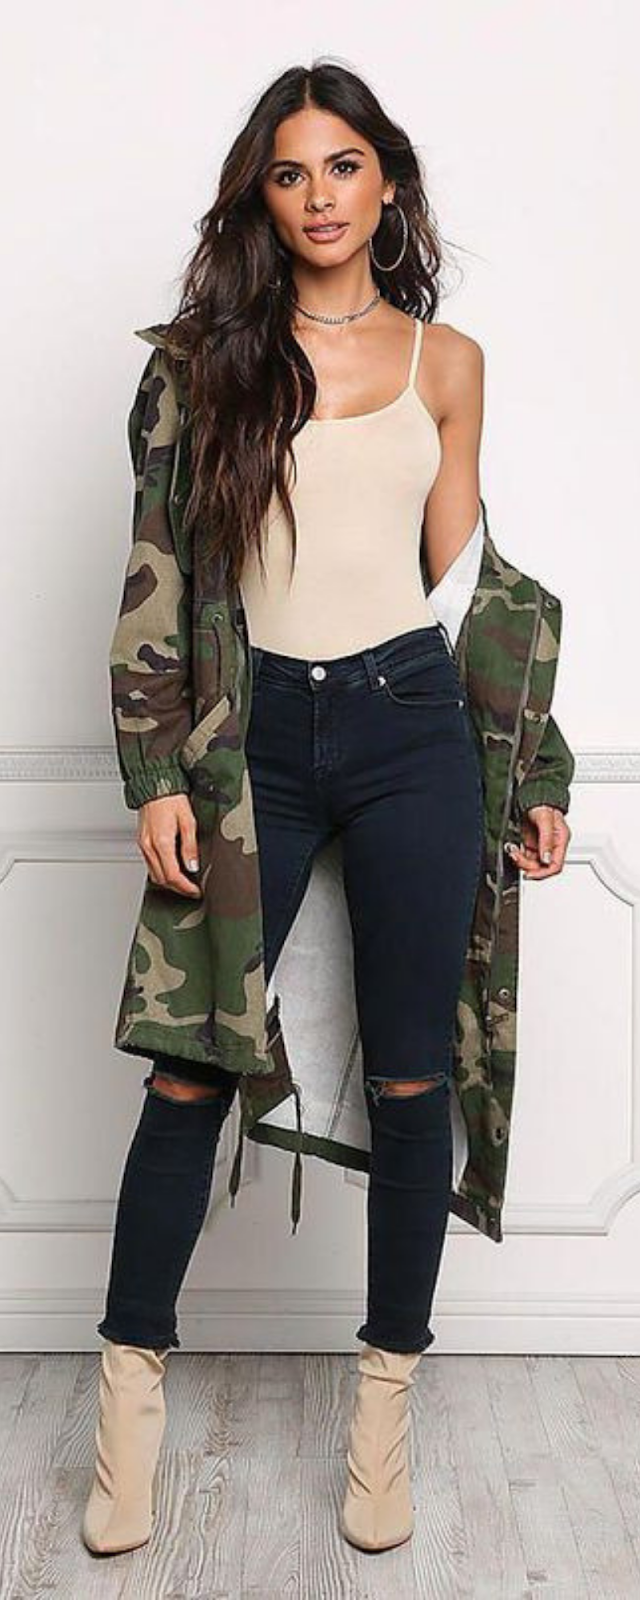 10 TRENDY FALL OUTFITS TO COPY RIGHT NOW Women's Fashion Passion